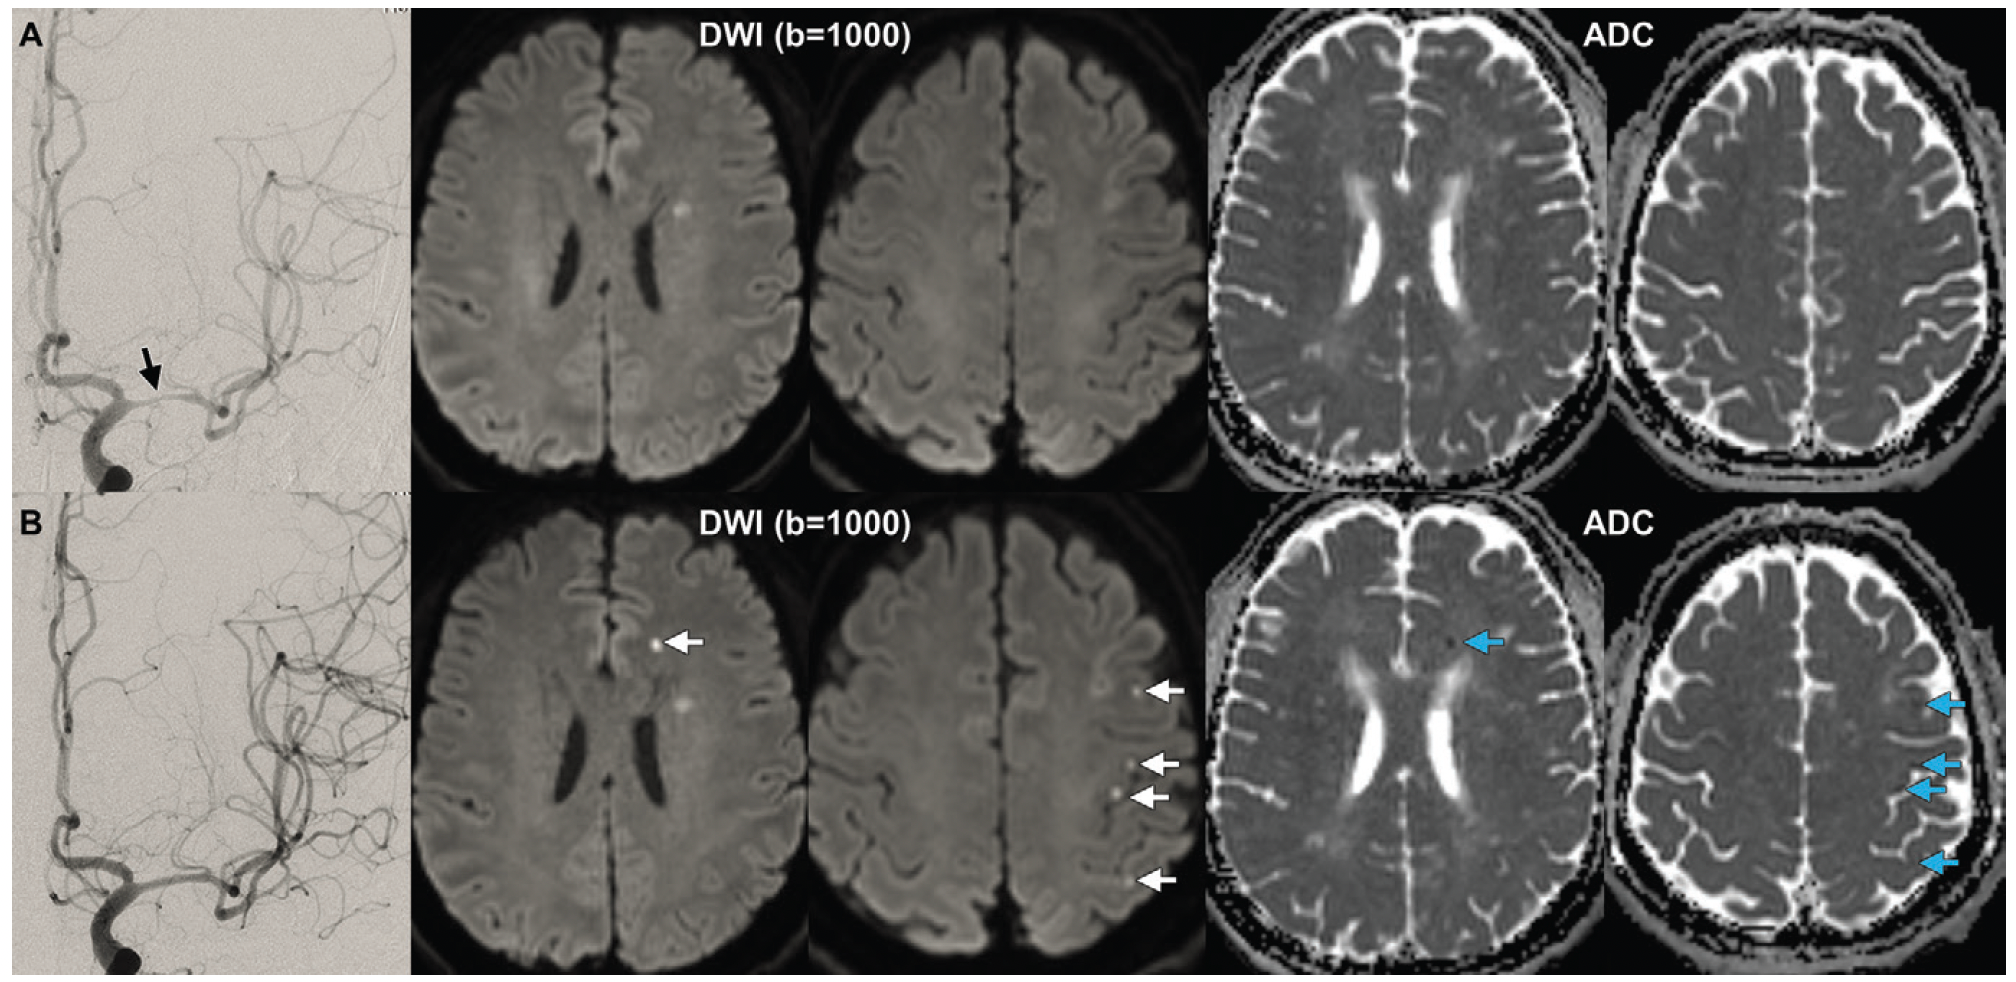 Post-Op MRI Shows New Ischemic Brain Lesions in 65 Percent of Patients After Endovascular Surgery for Intracranial Atherosclerotic Stenosis